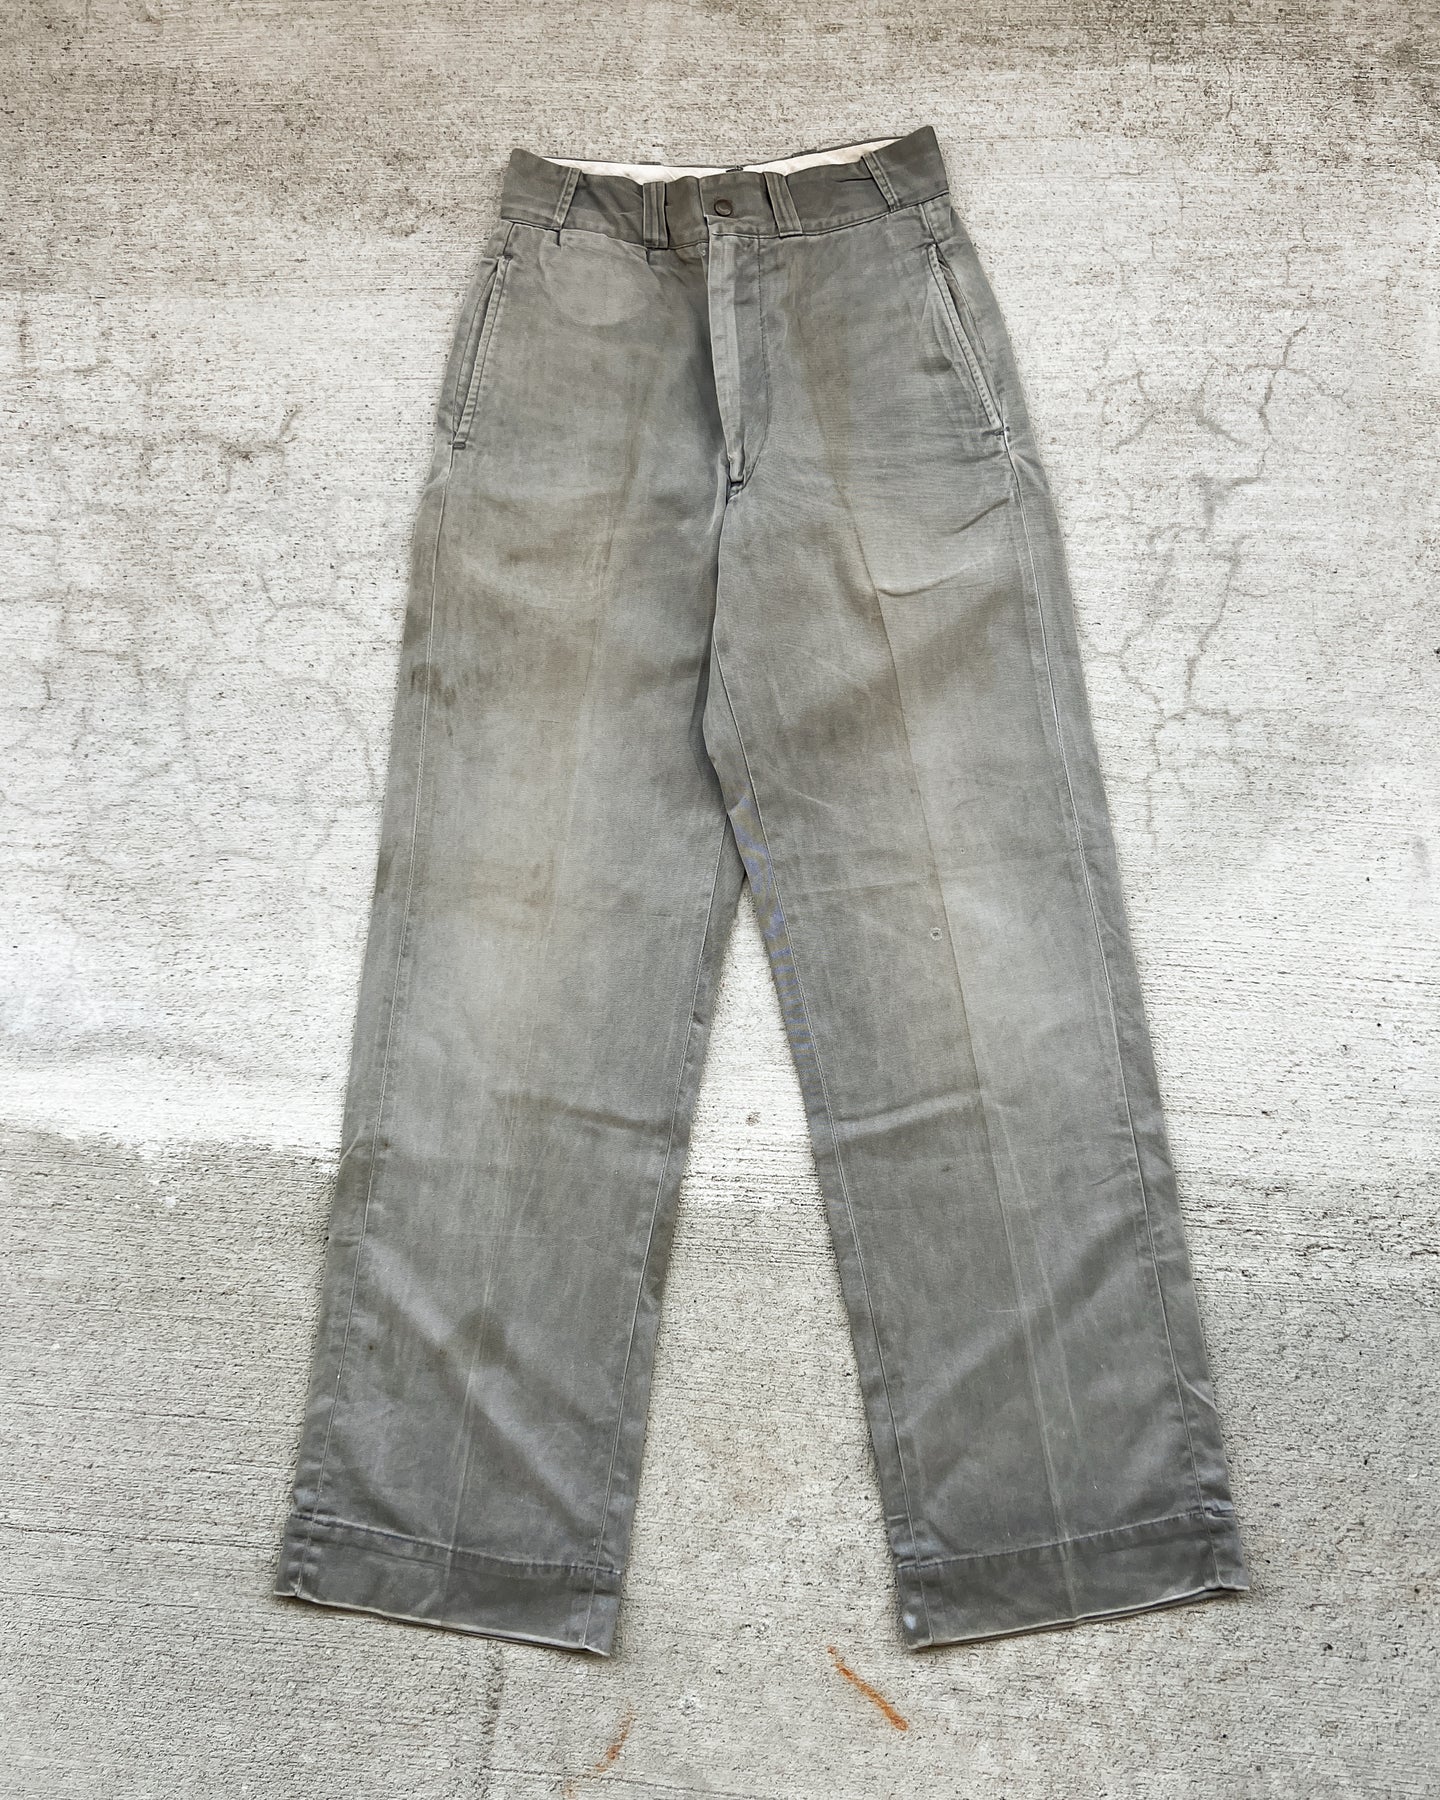 1950s Stained Grey Chino Work Pants - Size 27 x 32